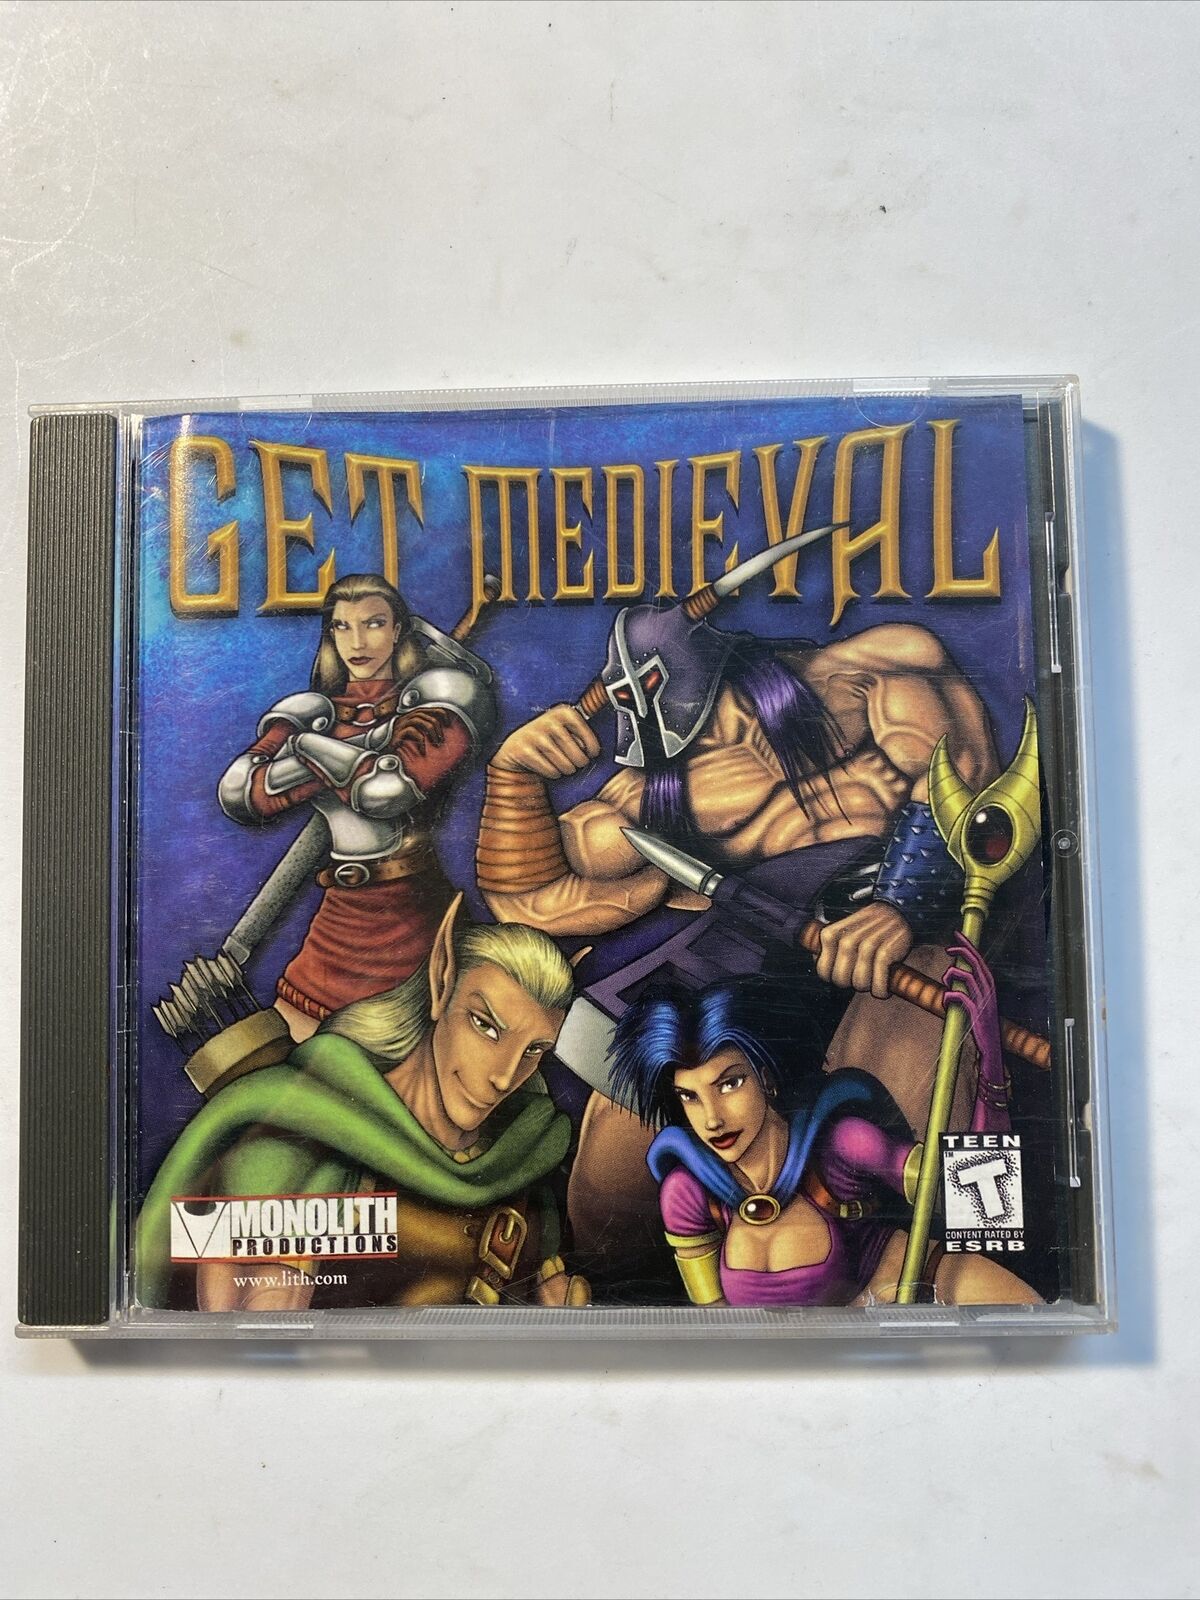 Get Medieval for PC\\CD by Monolith Productions WINDOWS 95\\98